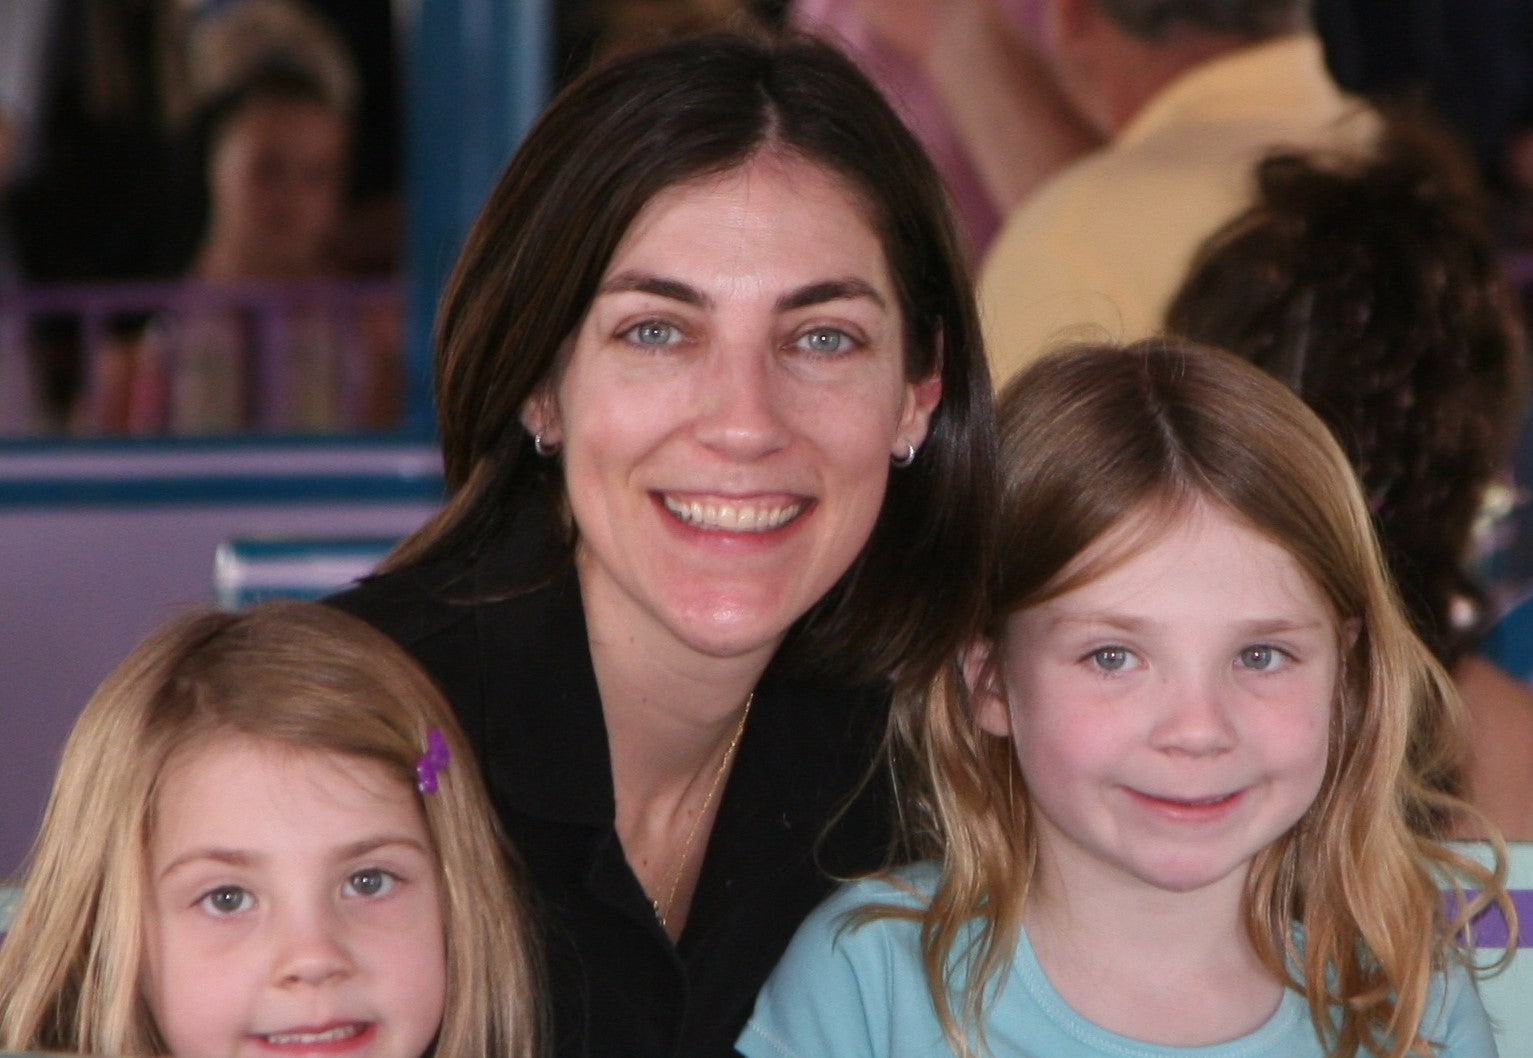 Brush On Block founder Andrea Wetsel with her two daughters when they were younger.